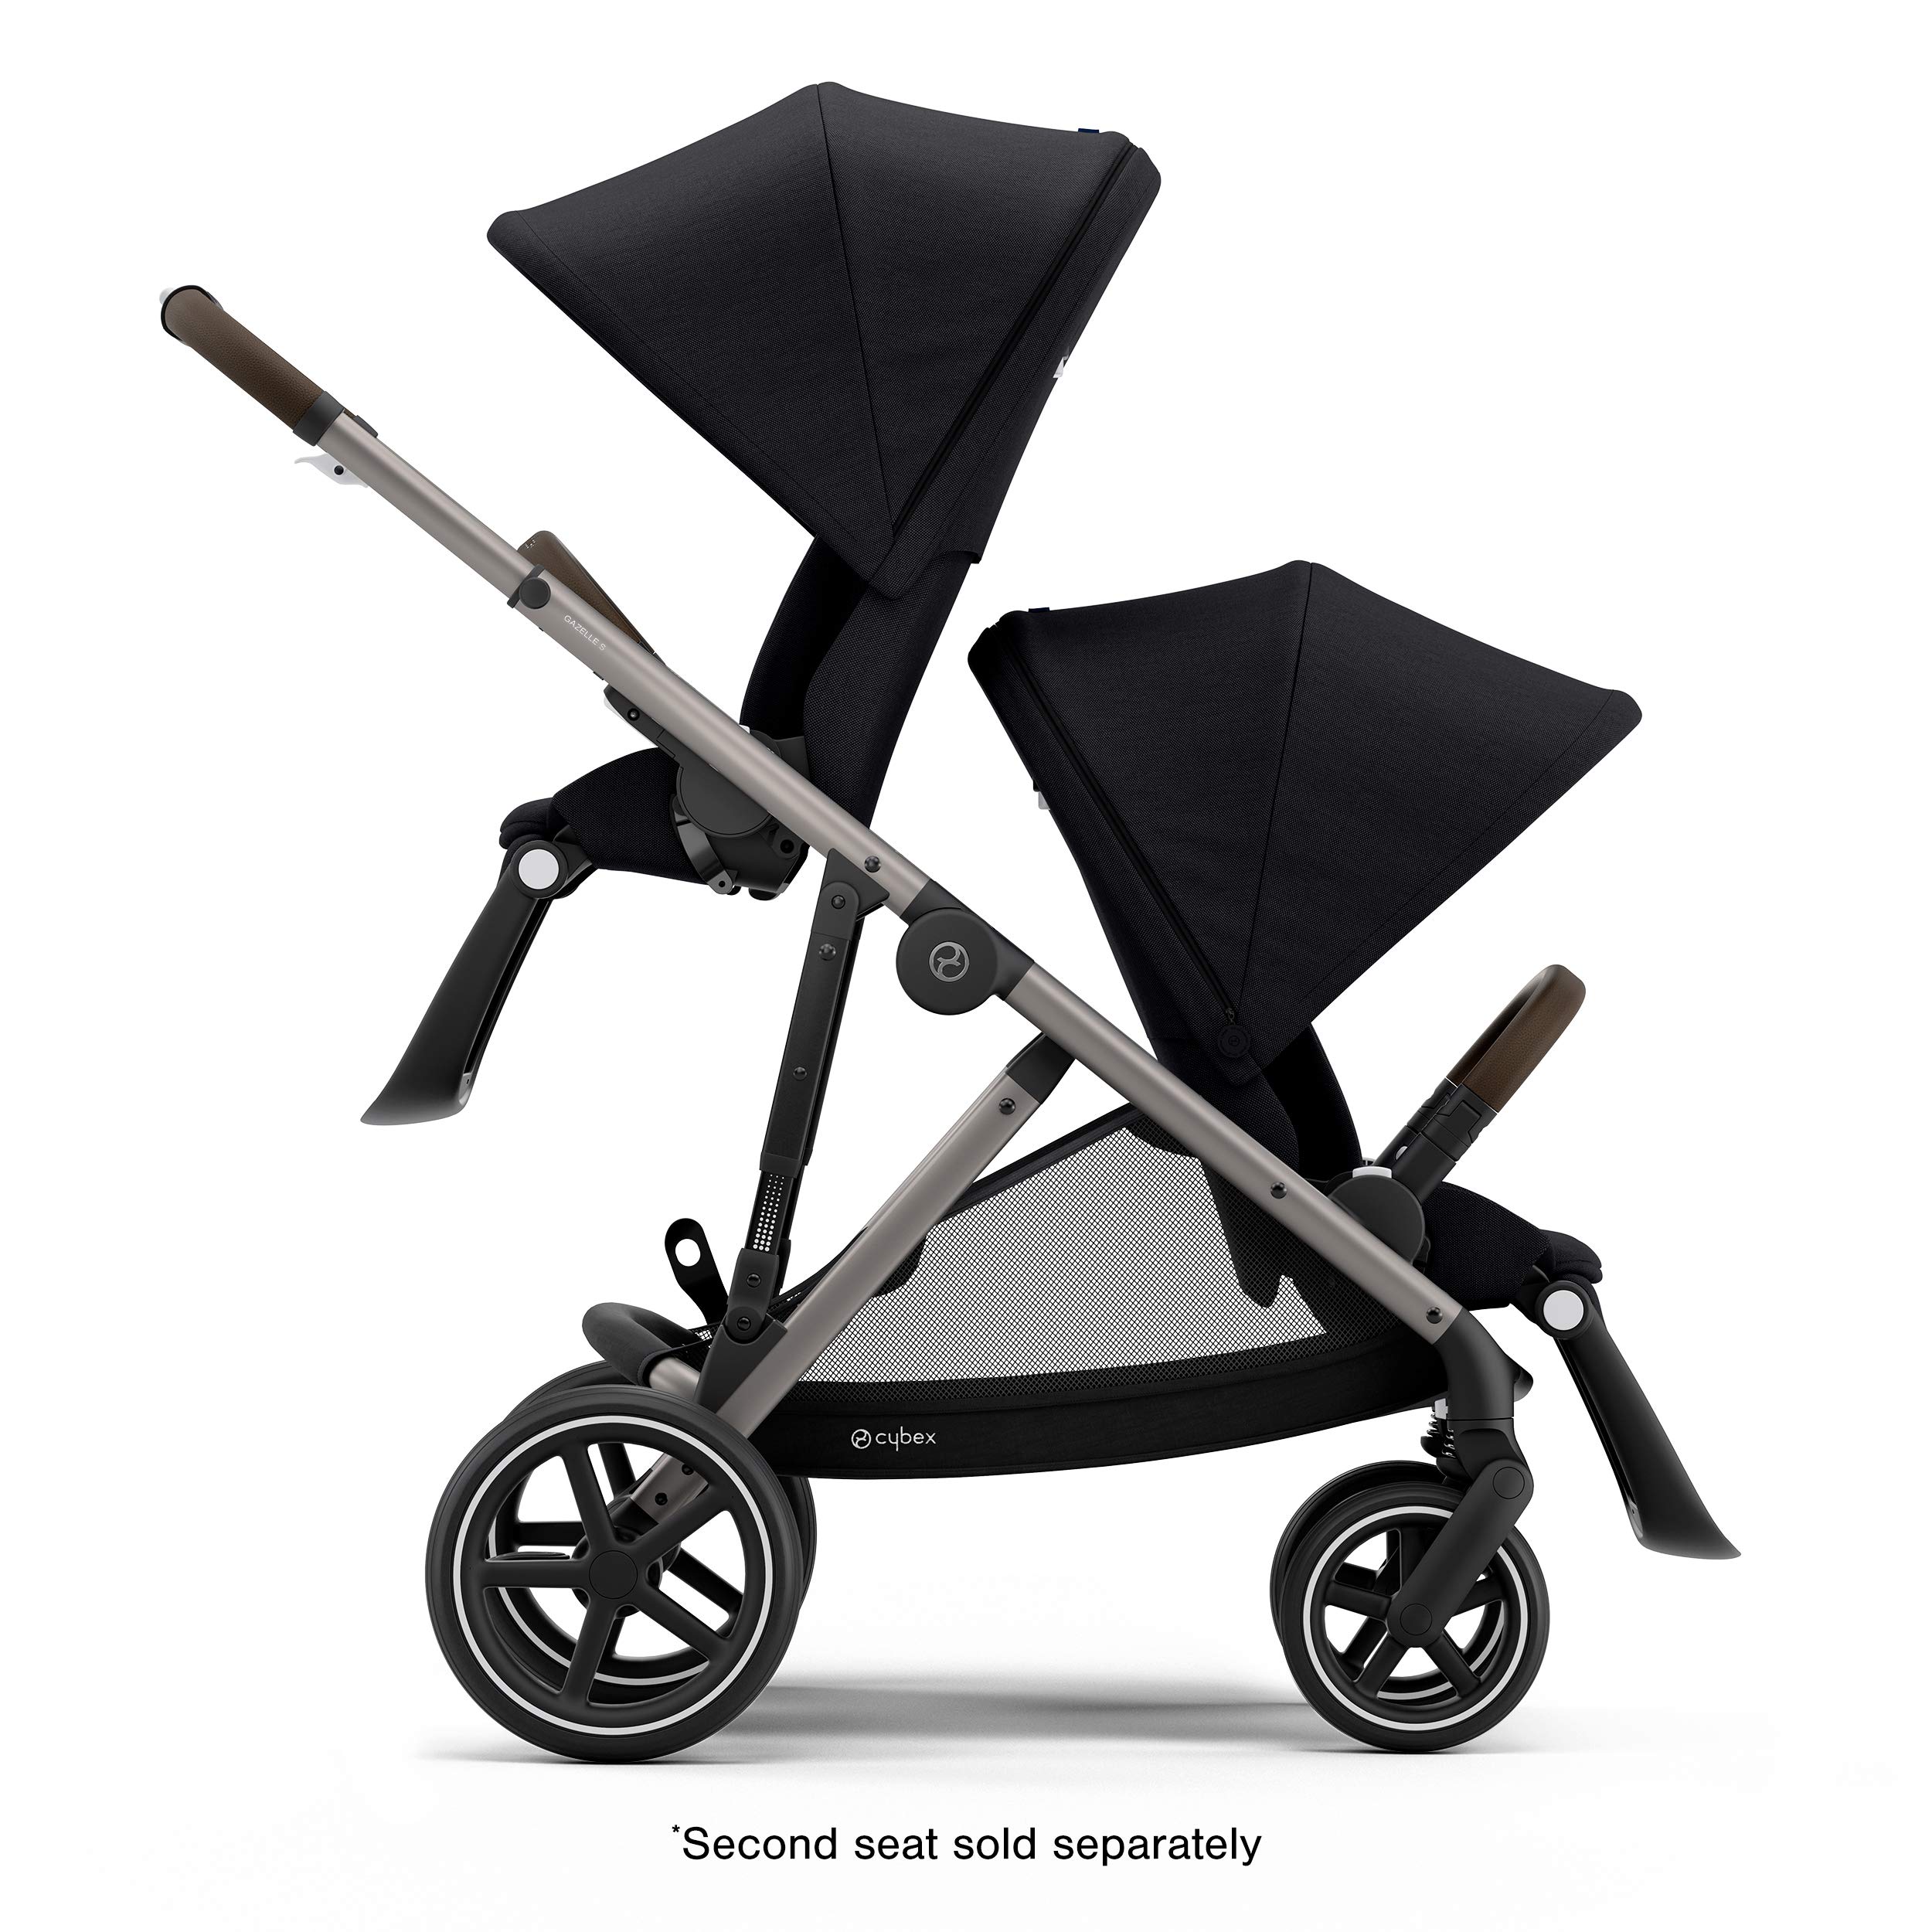 Gazelle S Stroller Modular Double Stroller for Infant and Toddler Includes Detachable Shopping Basket Over 20+ Configurations Folds Flat for Easy Storage